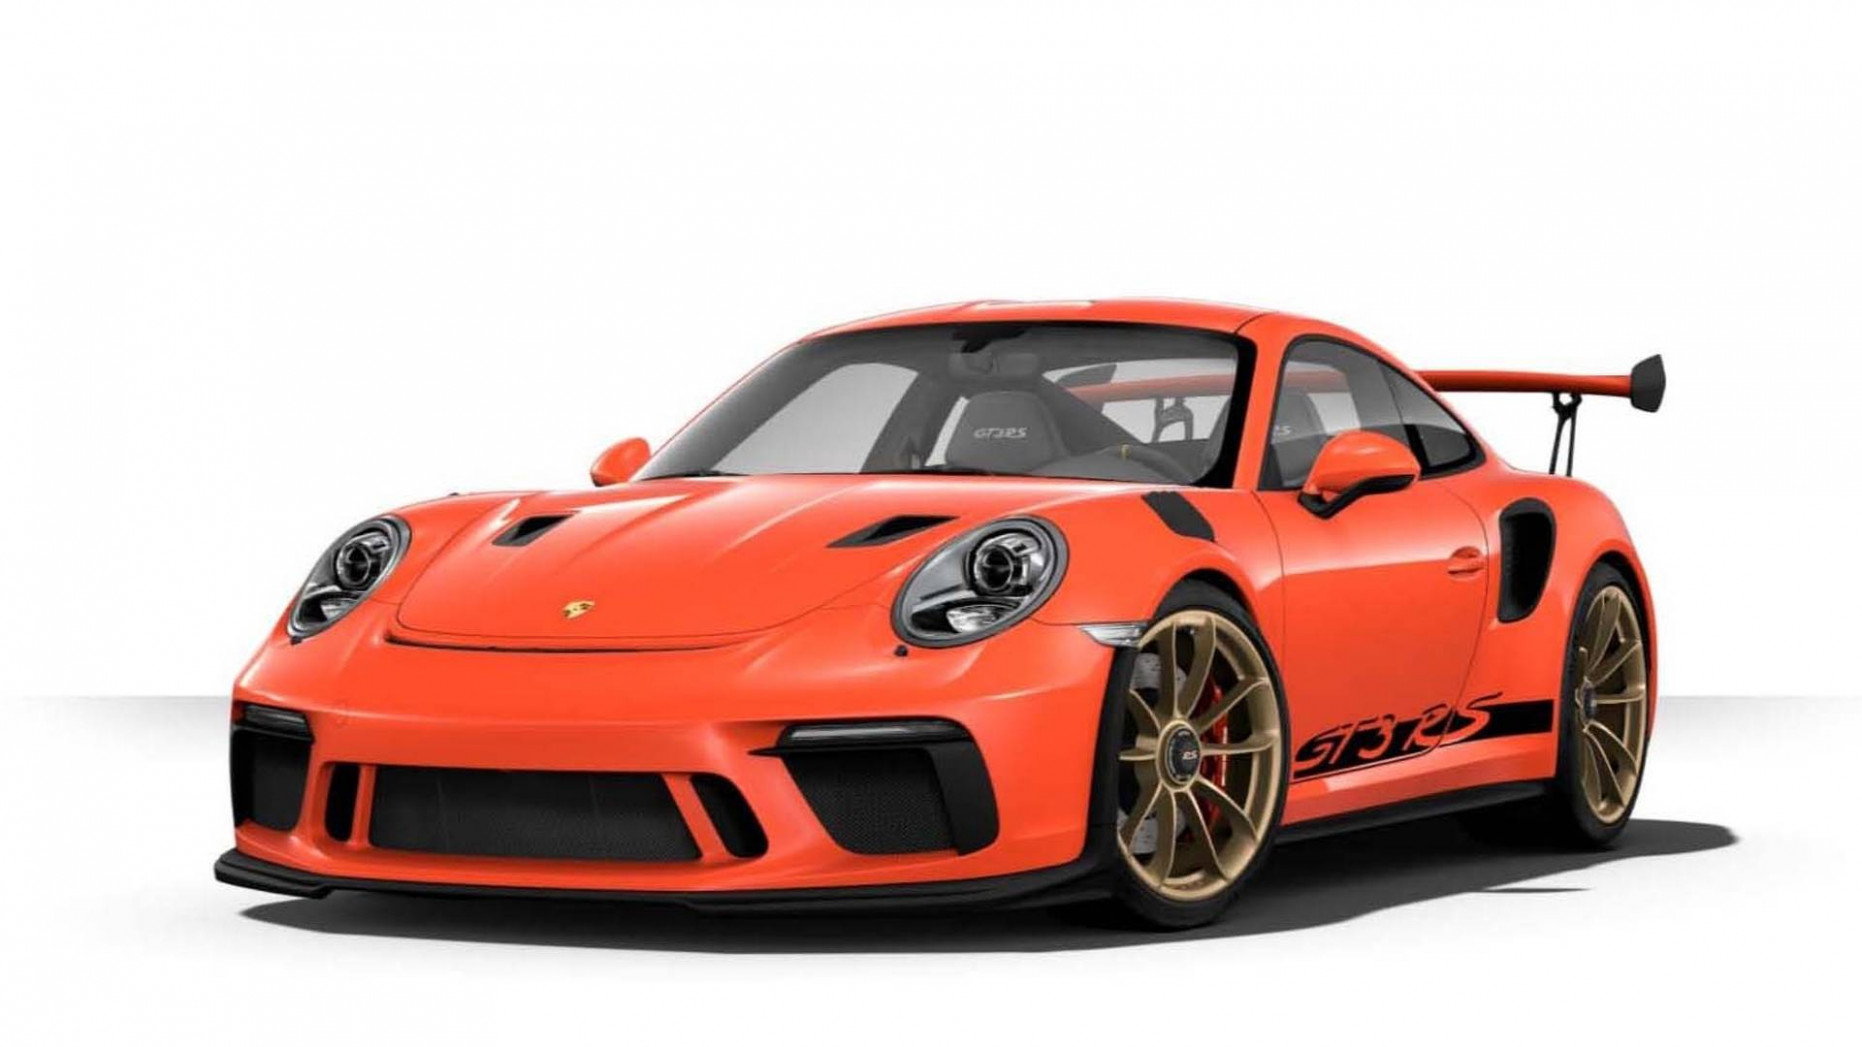 The Most Expensive Porsche 5 Gt5 Rs Costs $255,5 How Much Is A Porsche Gt3 Rs